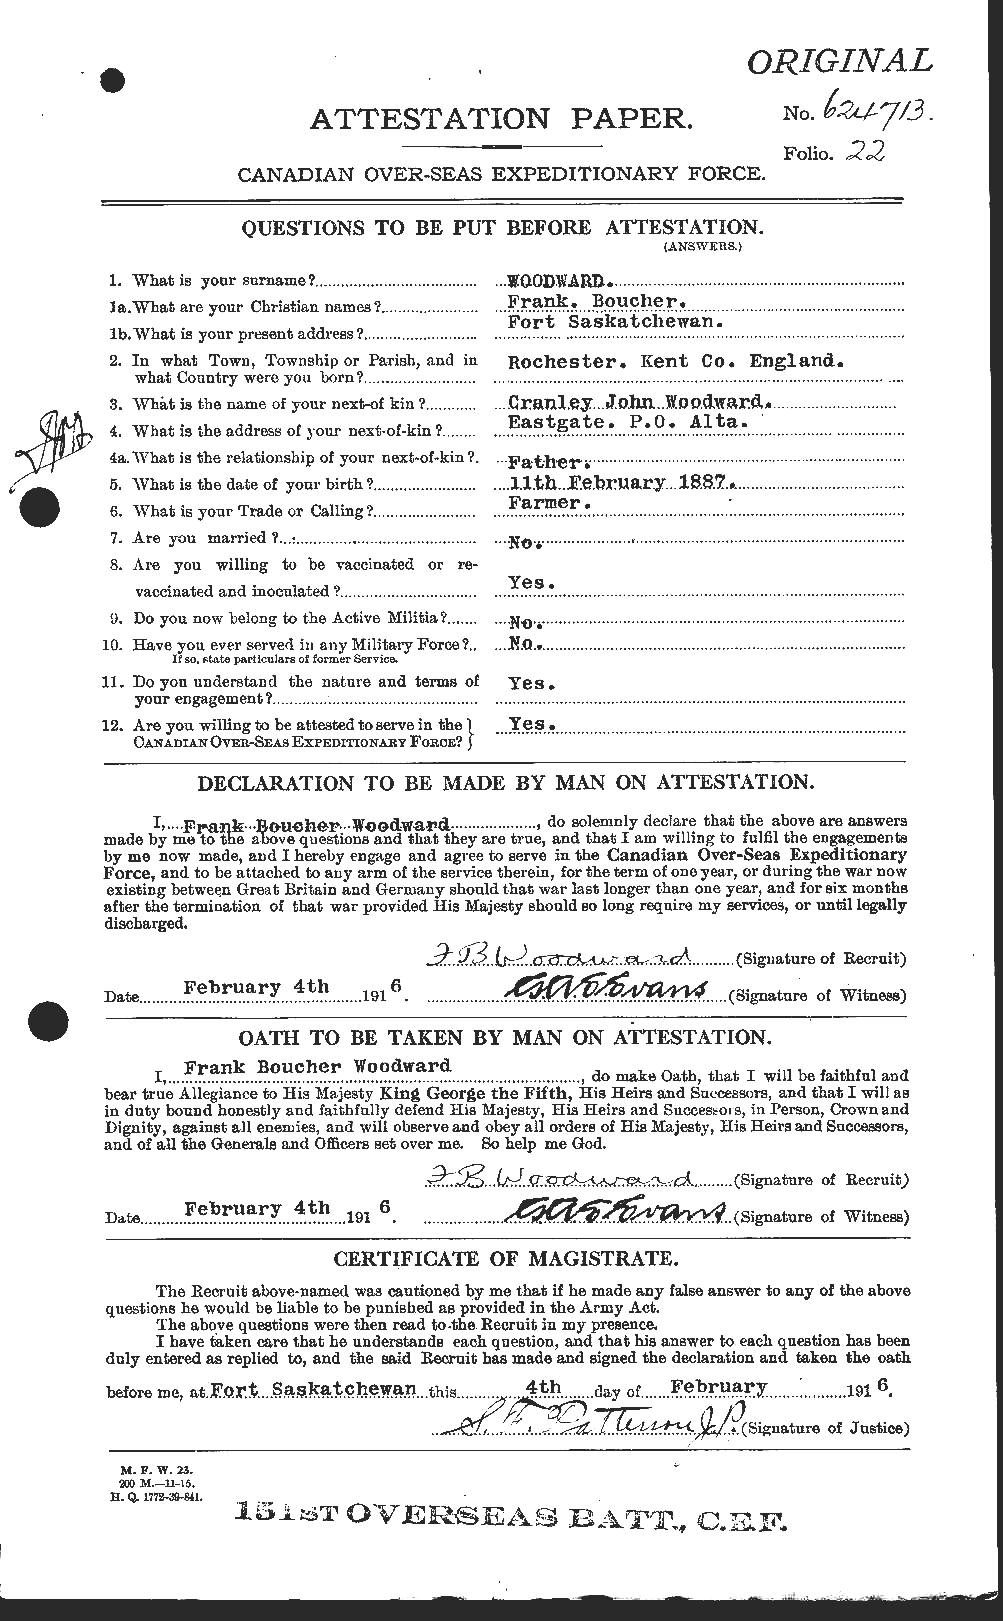 Personnel Records of the First World War - CEF 683622a